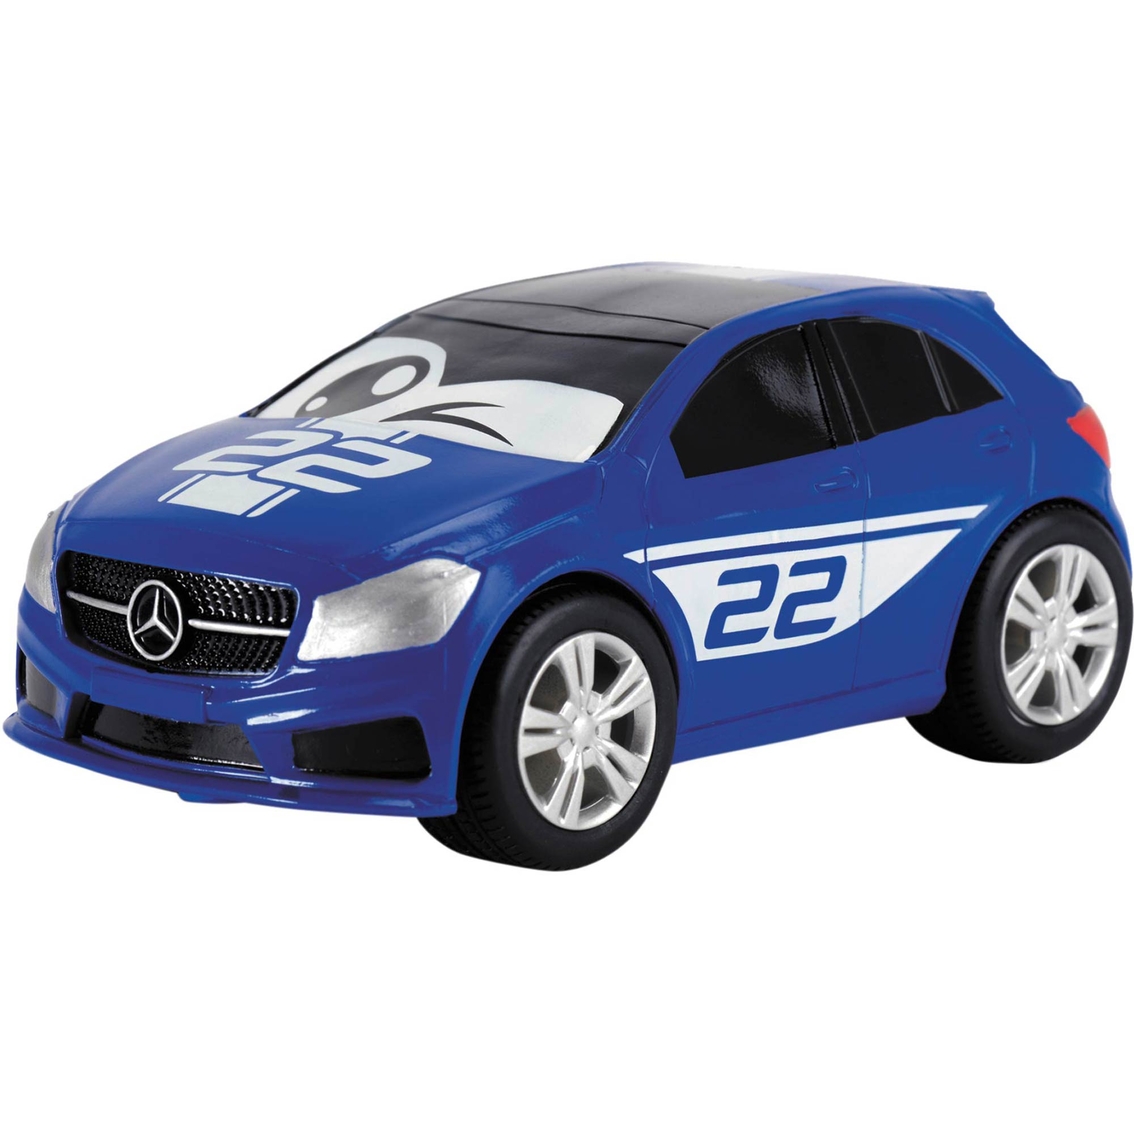 Dickie Toys Happy Squeezable Mercedes - Image 2 of 2